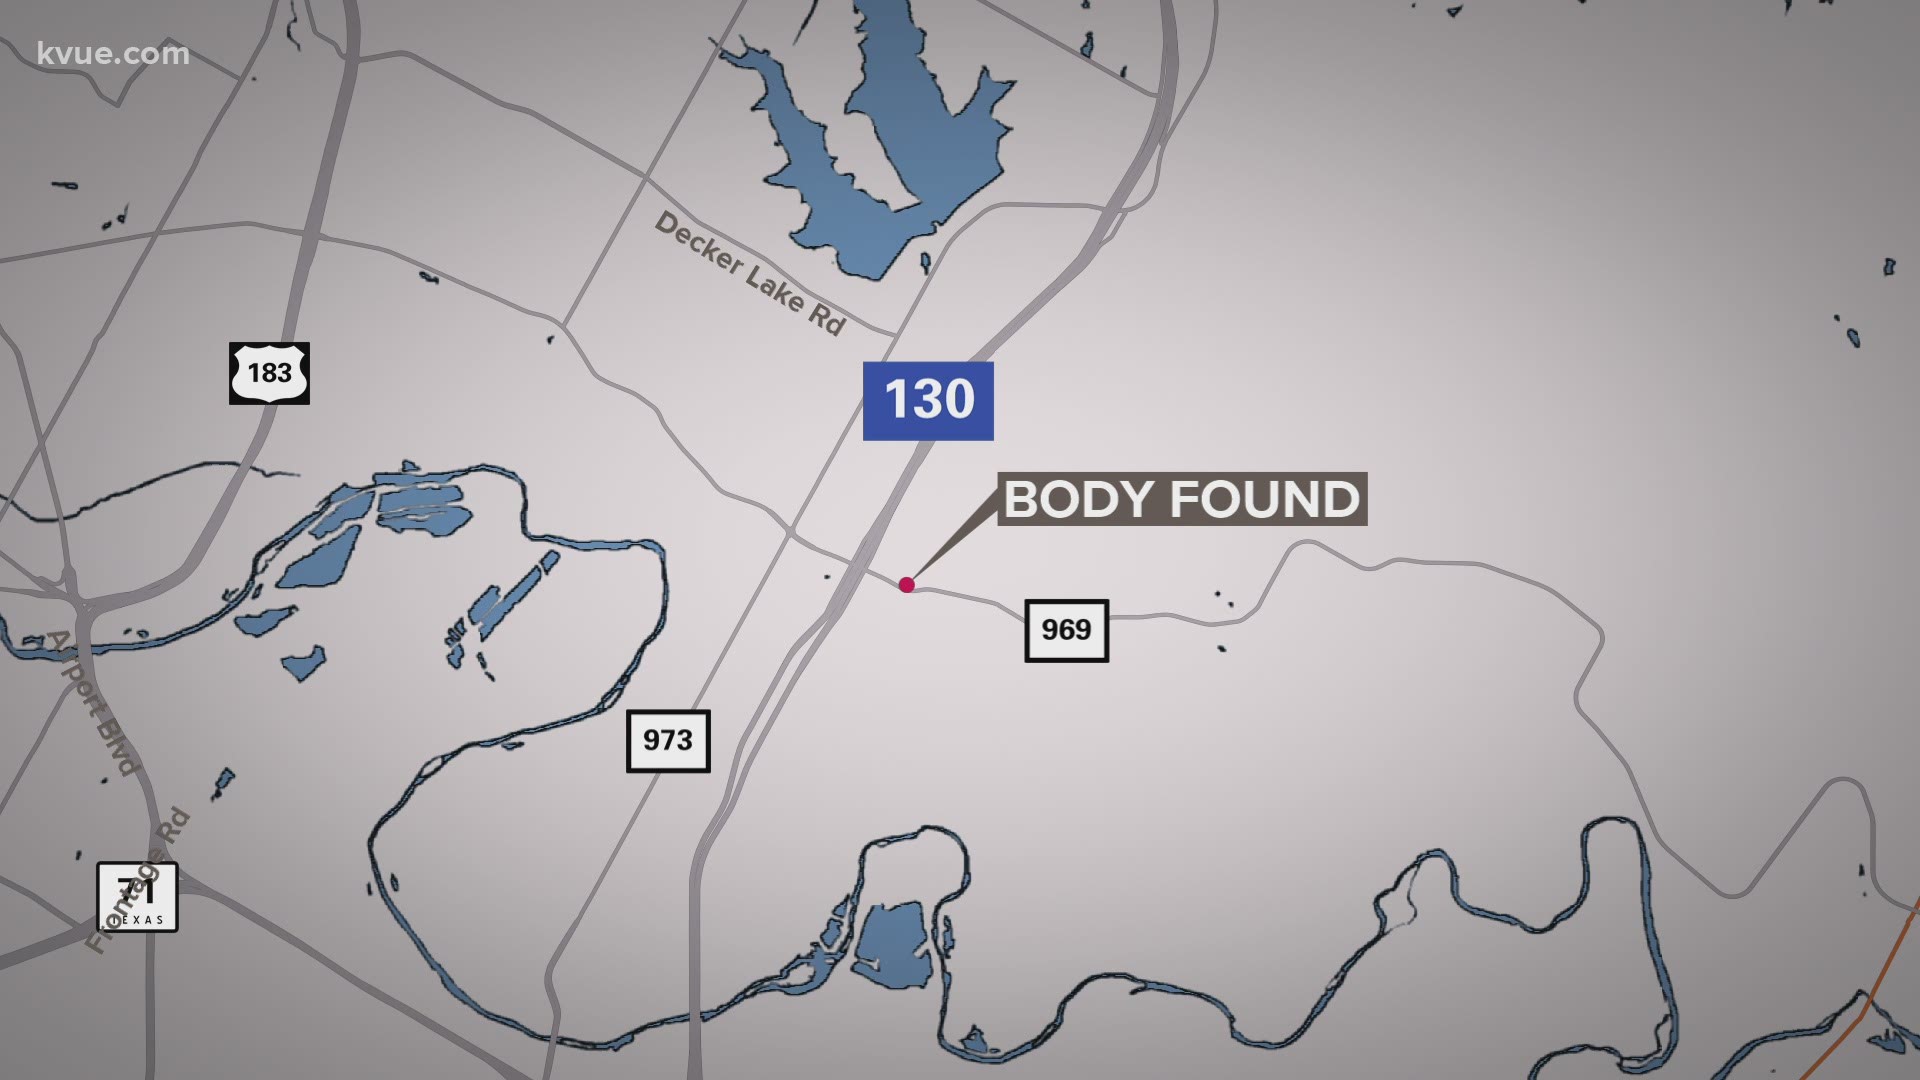 The sheriff's office said it found a body near water off FM 969 and SH 130.